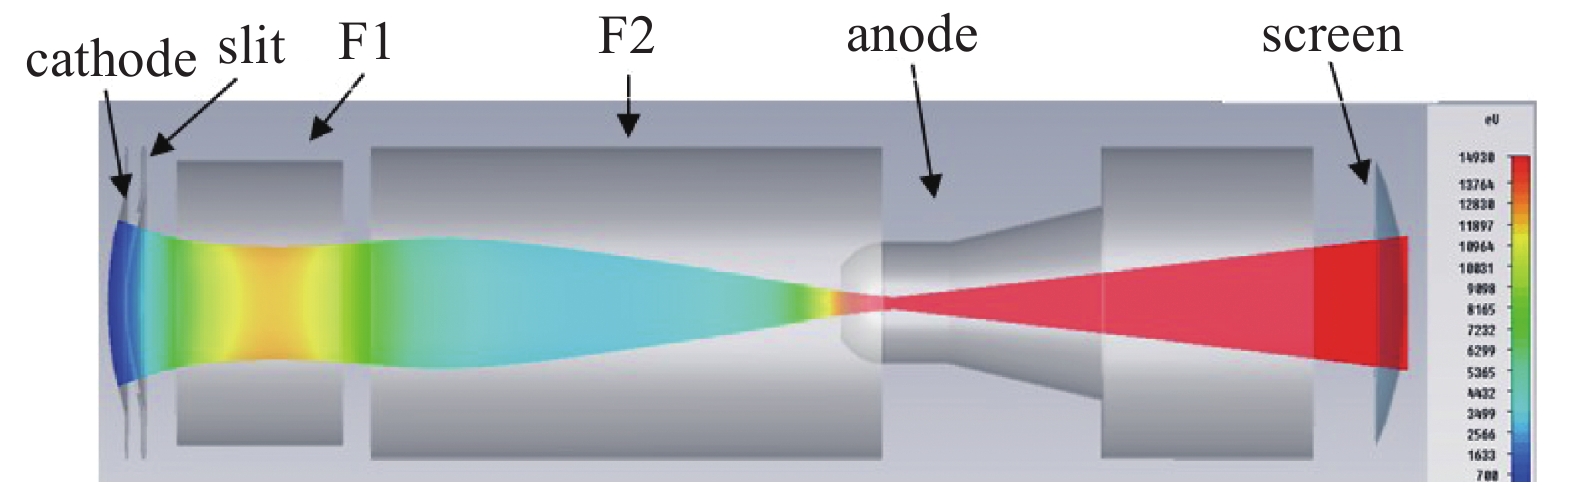 Long slit tube with high spatial and temporal resolution